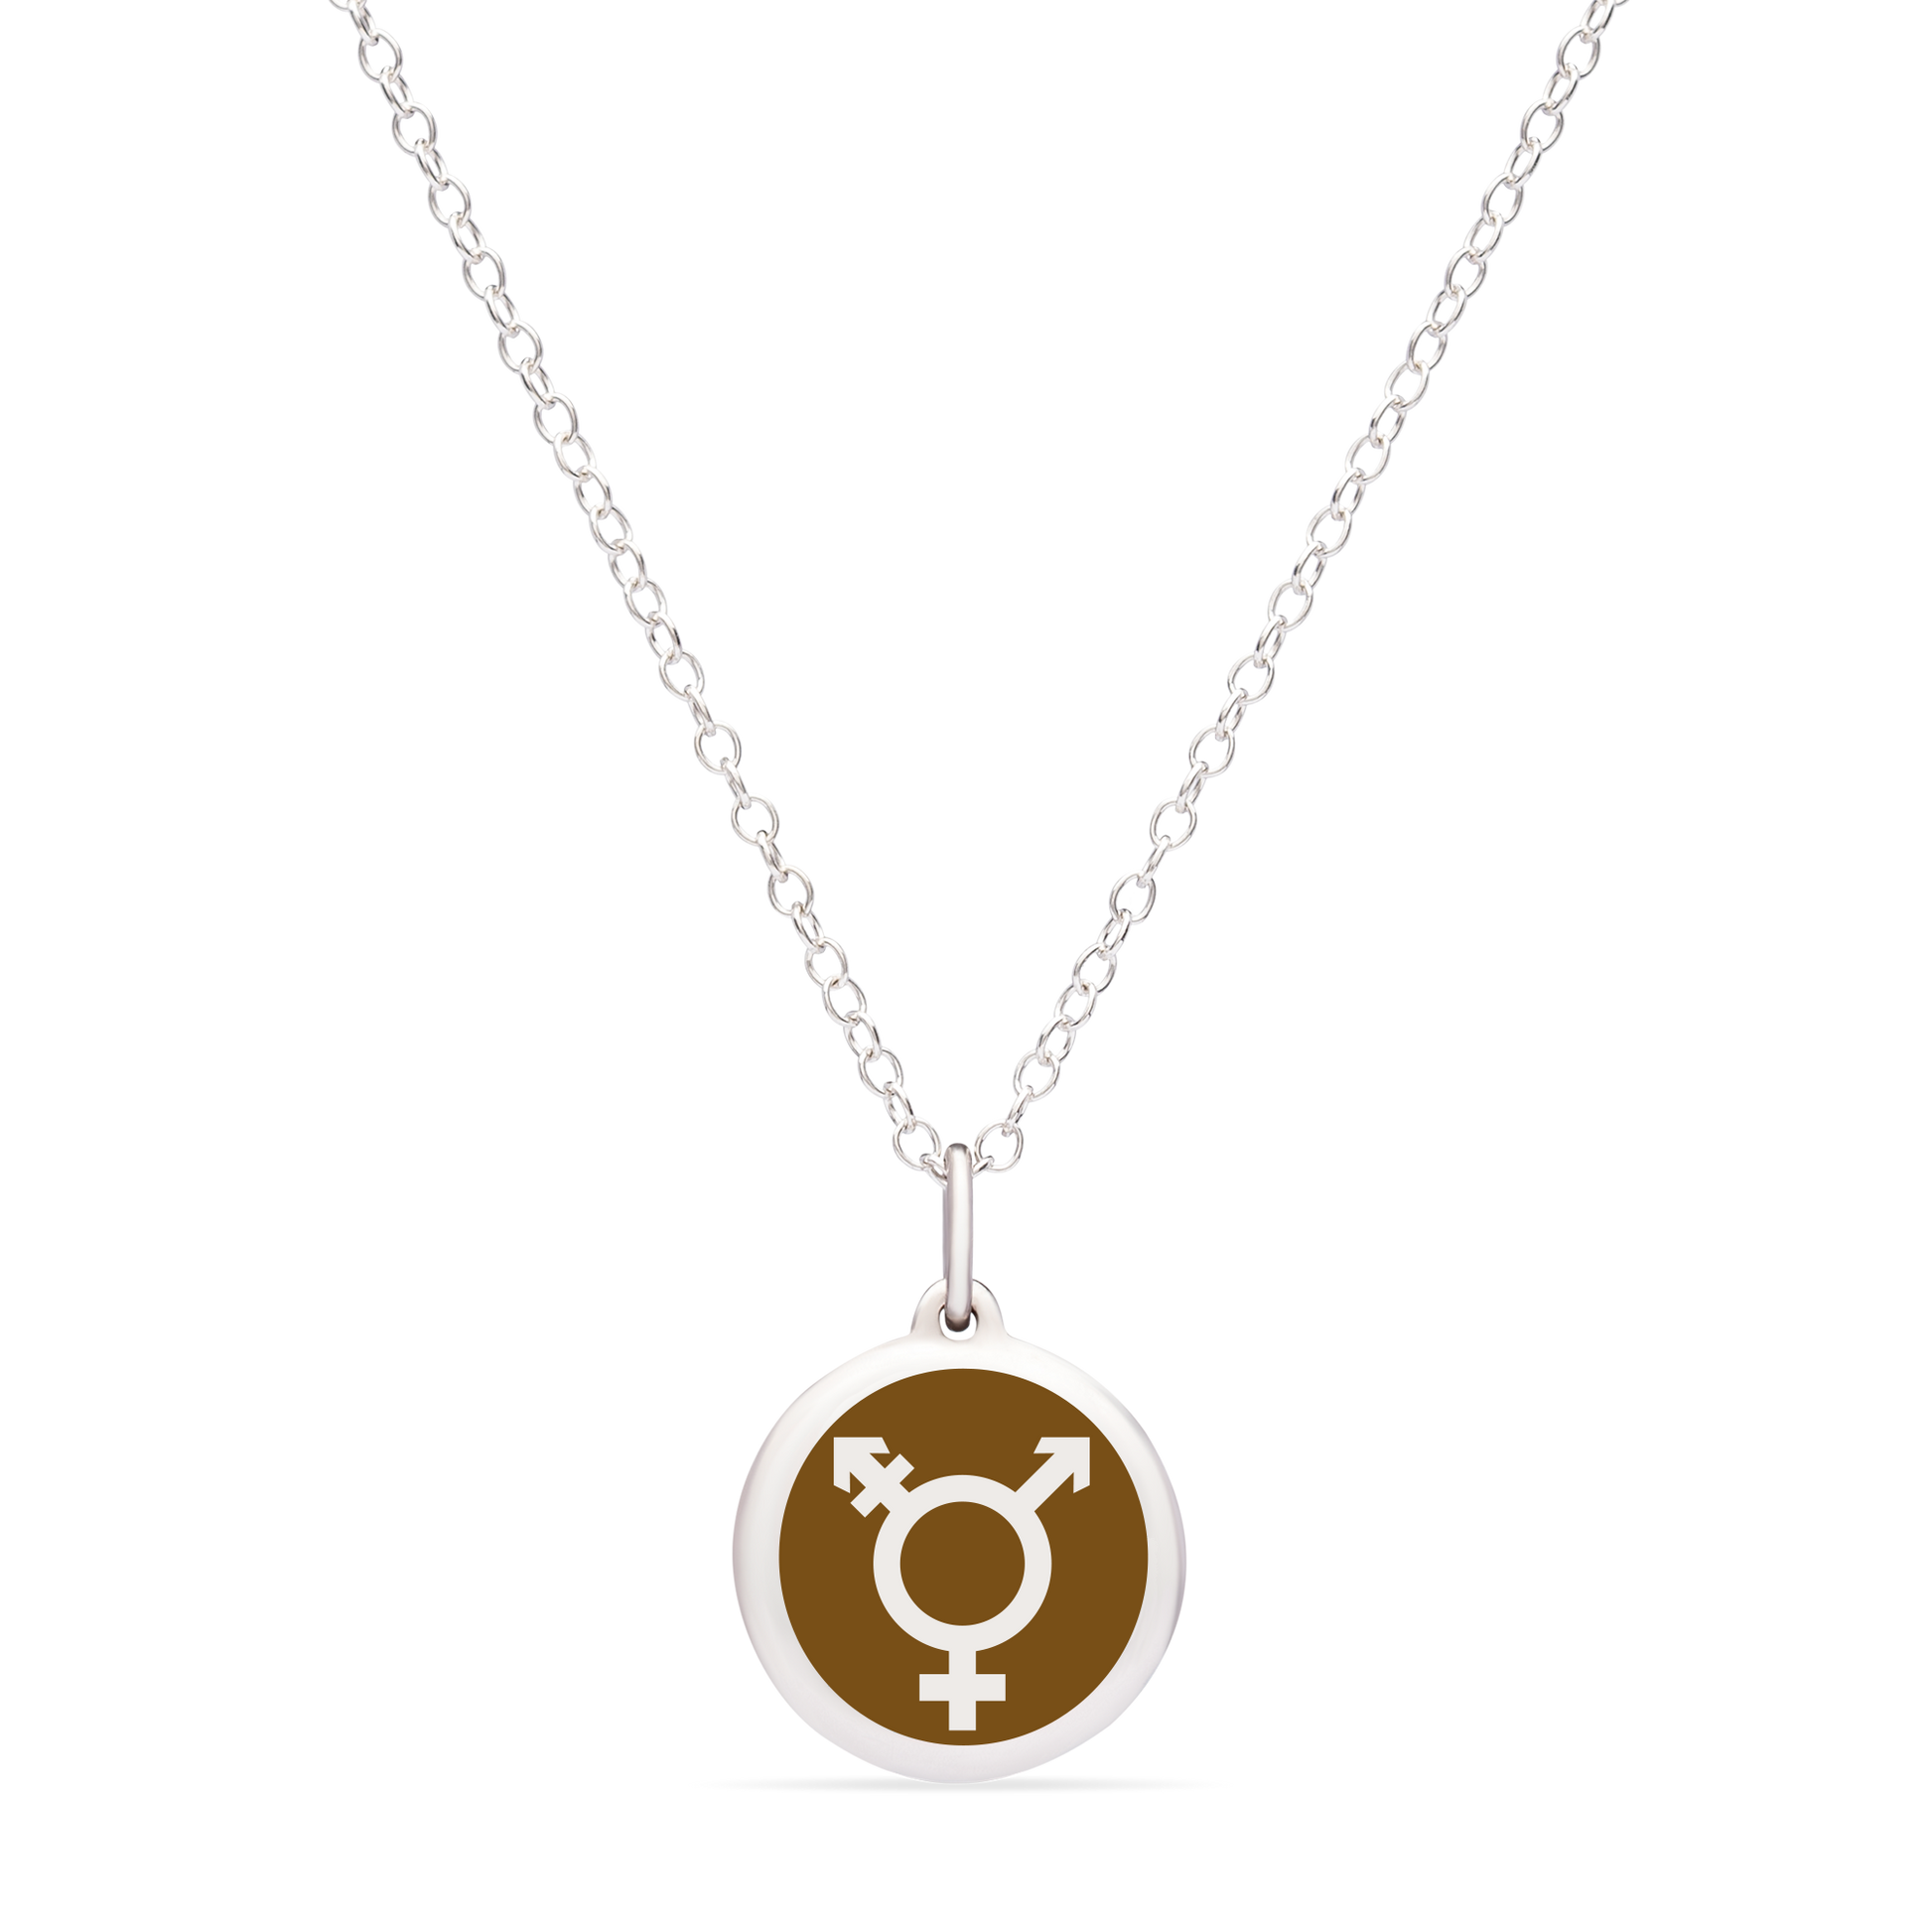 Double Male Symbol Necklace Stainless Steel Chain Pendant LGBT Gay Pride  Mars for sale online | eBay